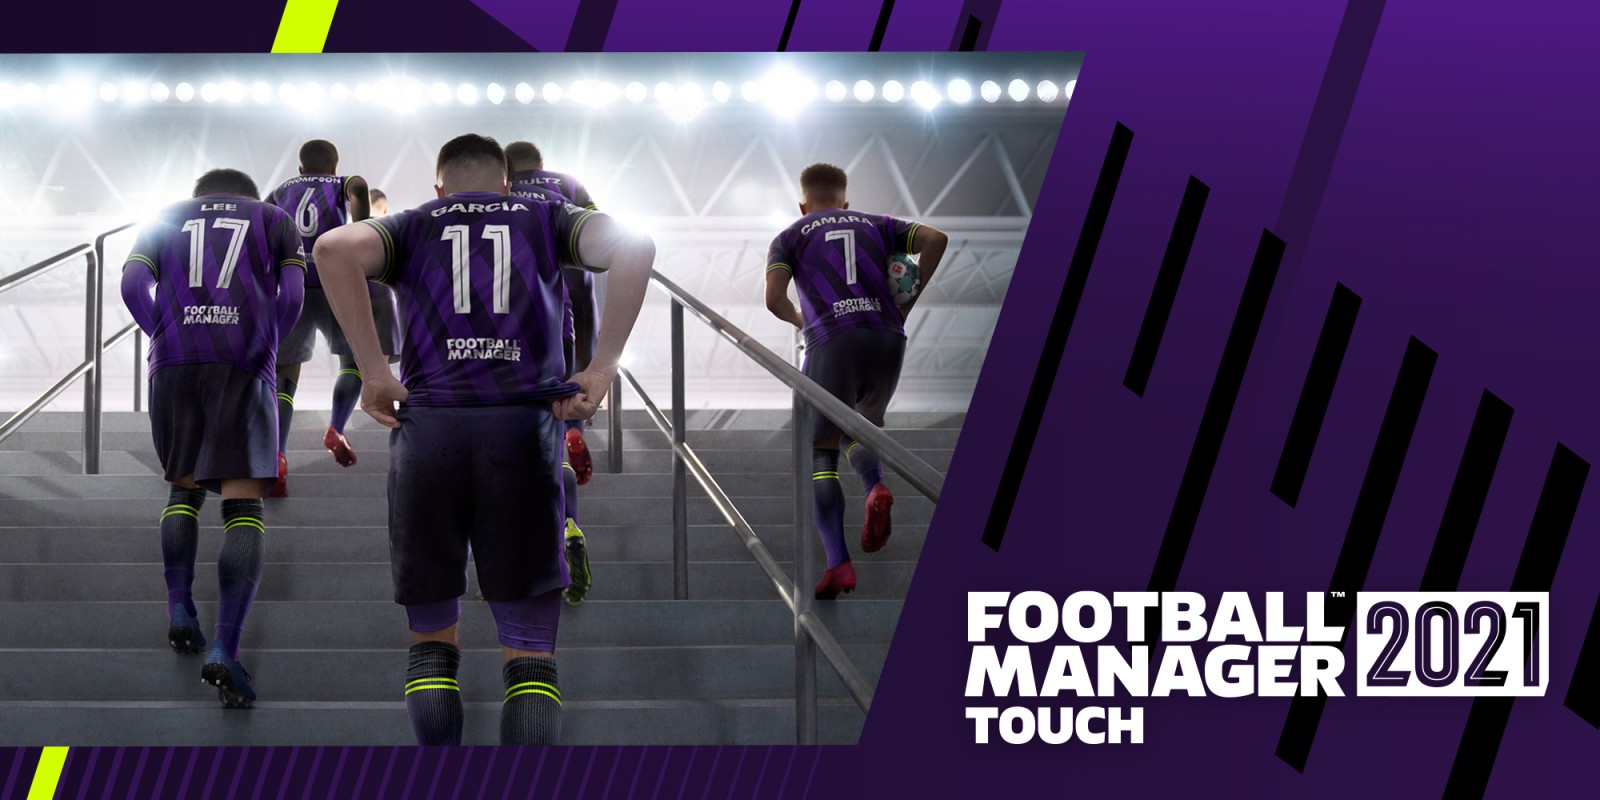 Football Manager 2021 Touch Nintendo Switch download software Games